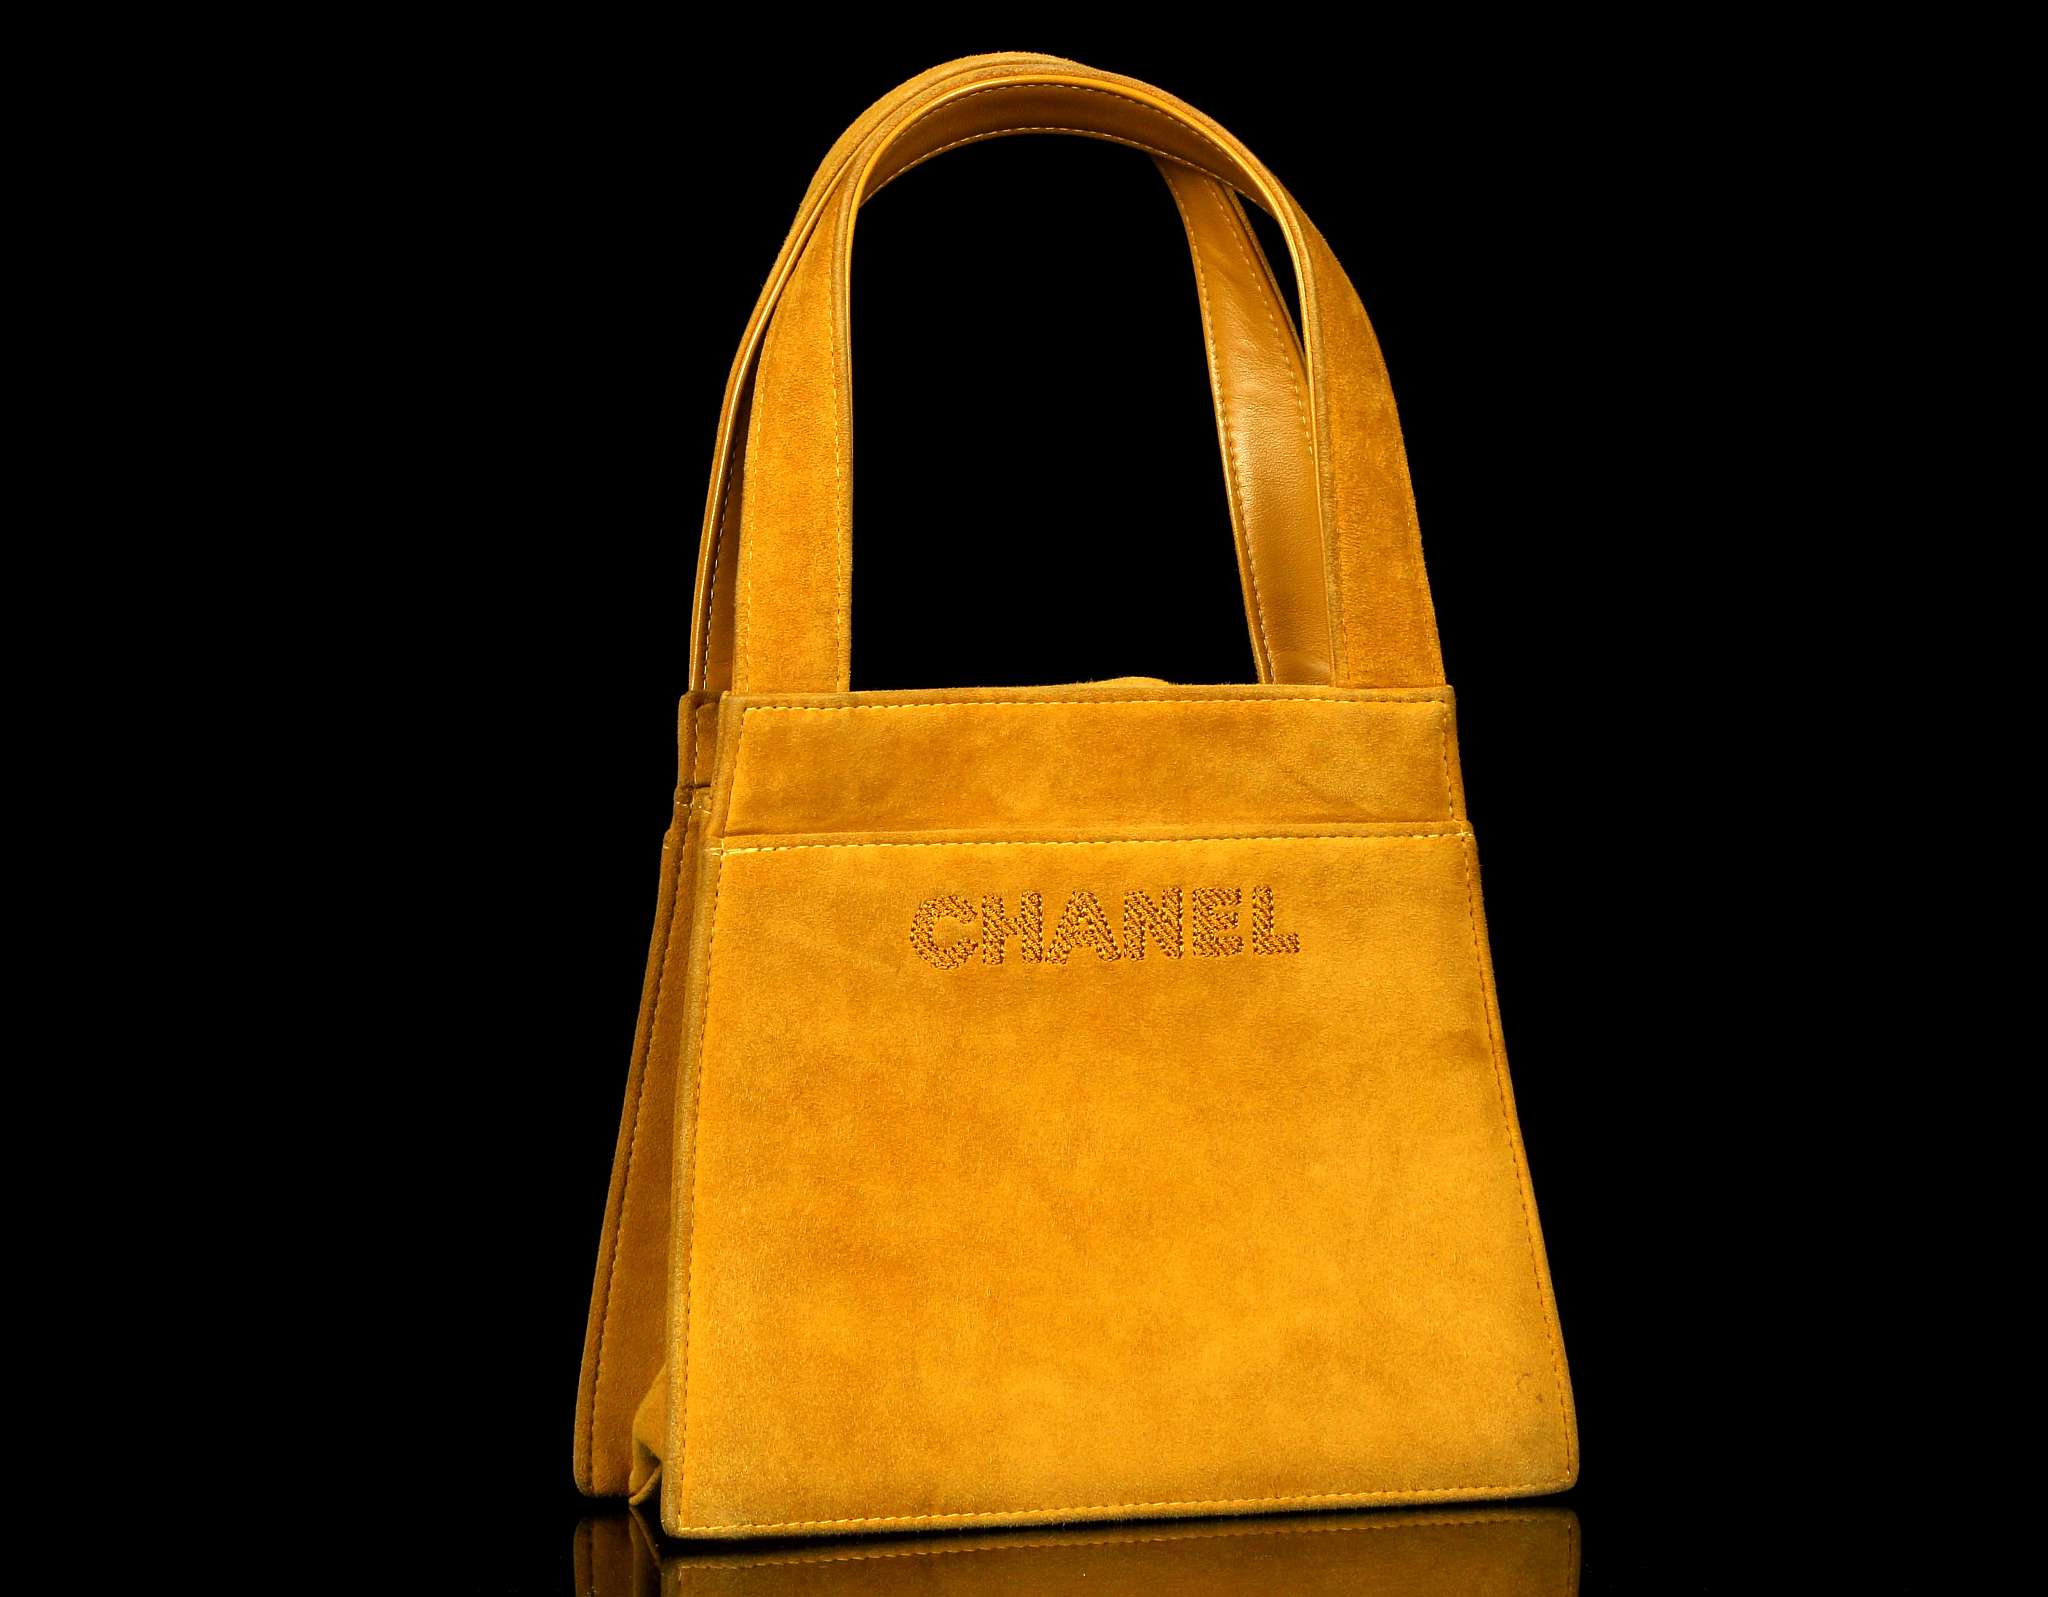 CHANEL EVENING BAG, date code for 1998, mustard ye